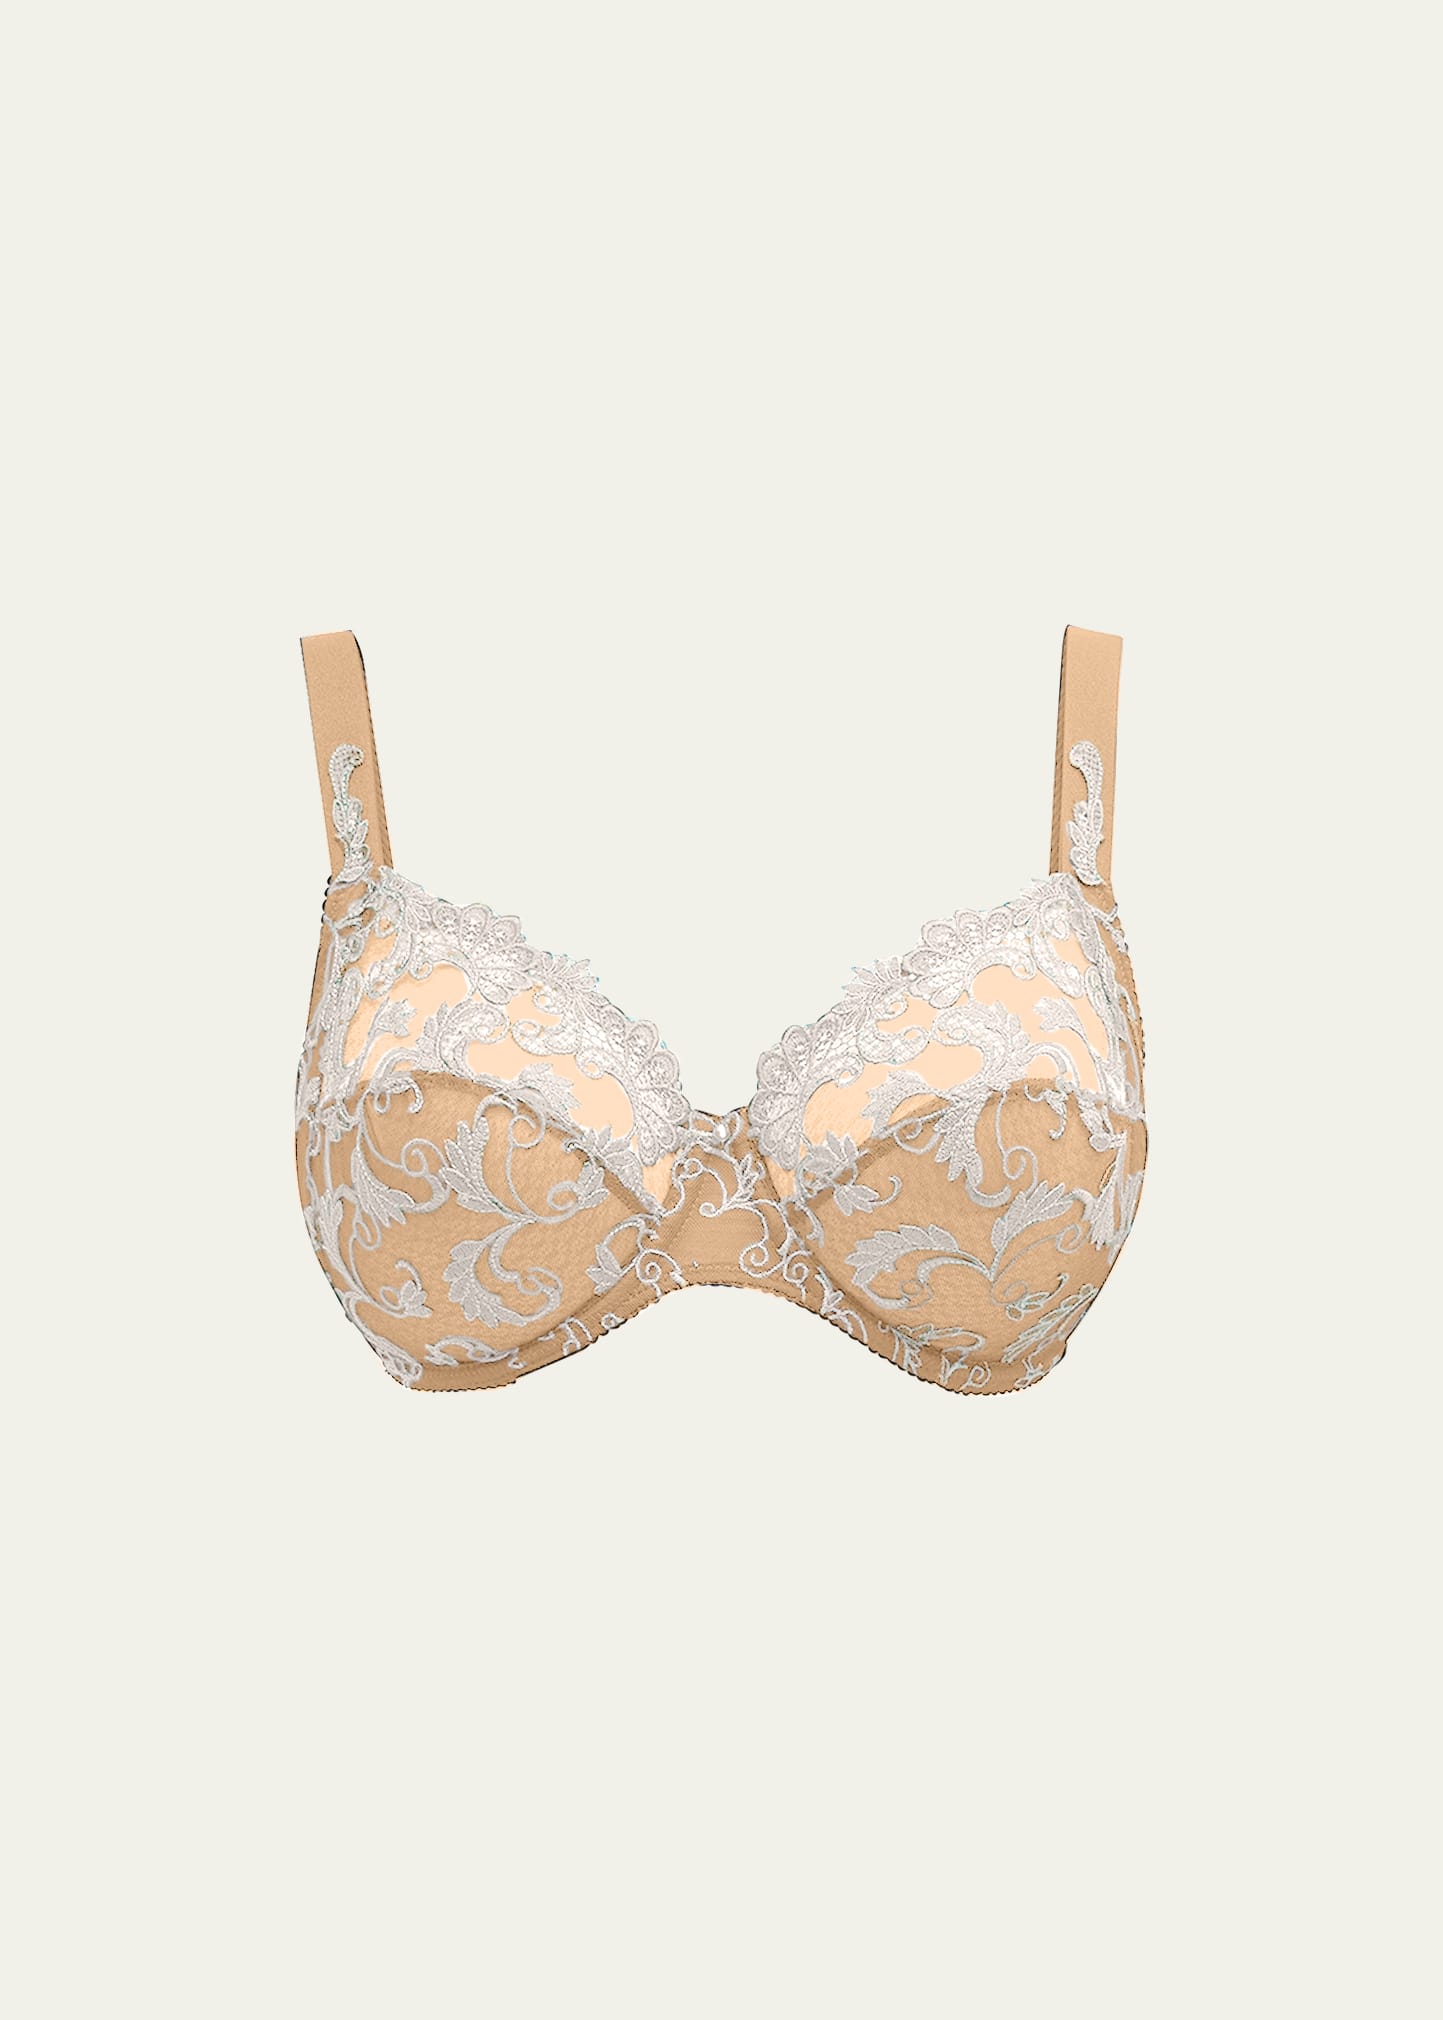 Guipure Charming 3-Part Full-Cup Bra